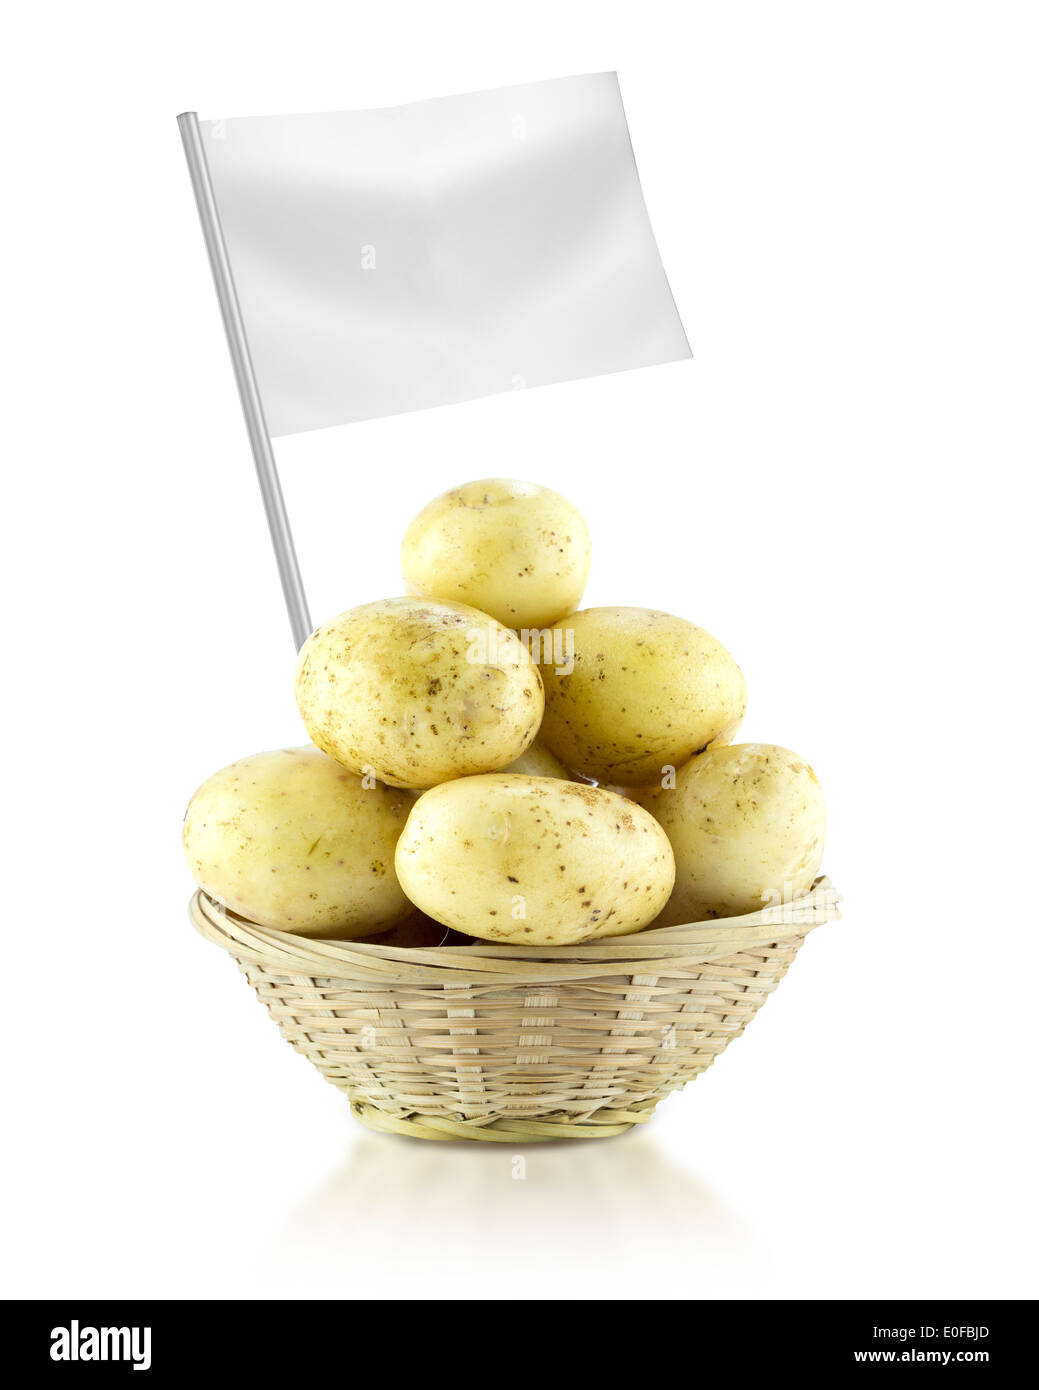 Healthy and organic food concept. Fresh Potato with flag showing the benefits or the price of fruits. Stock Photo